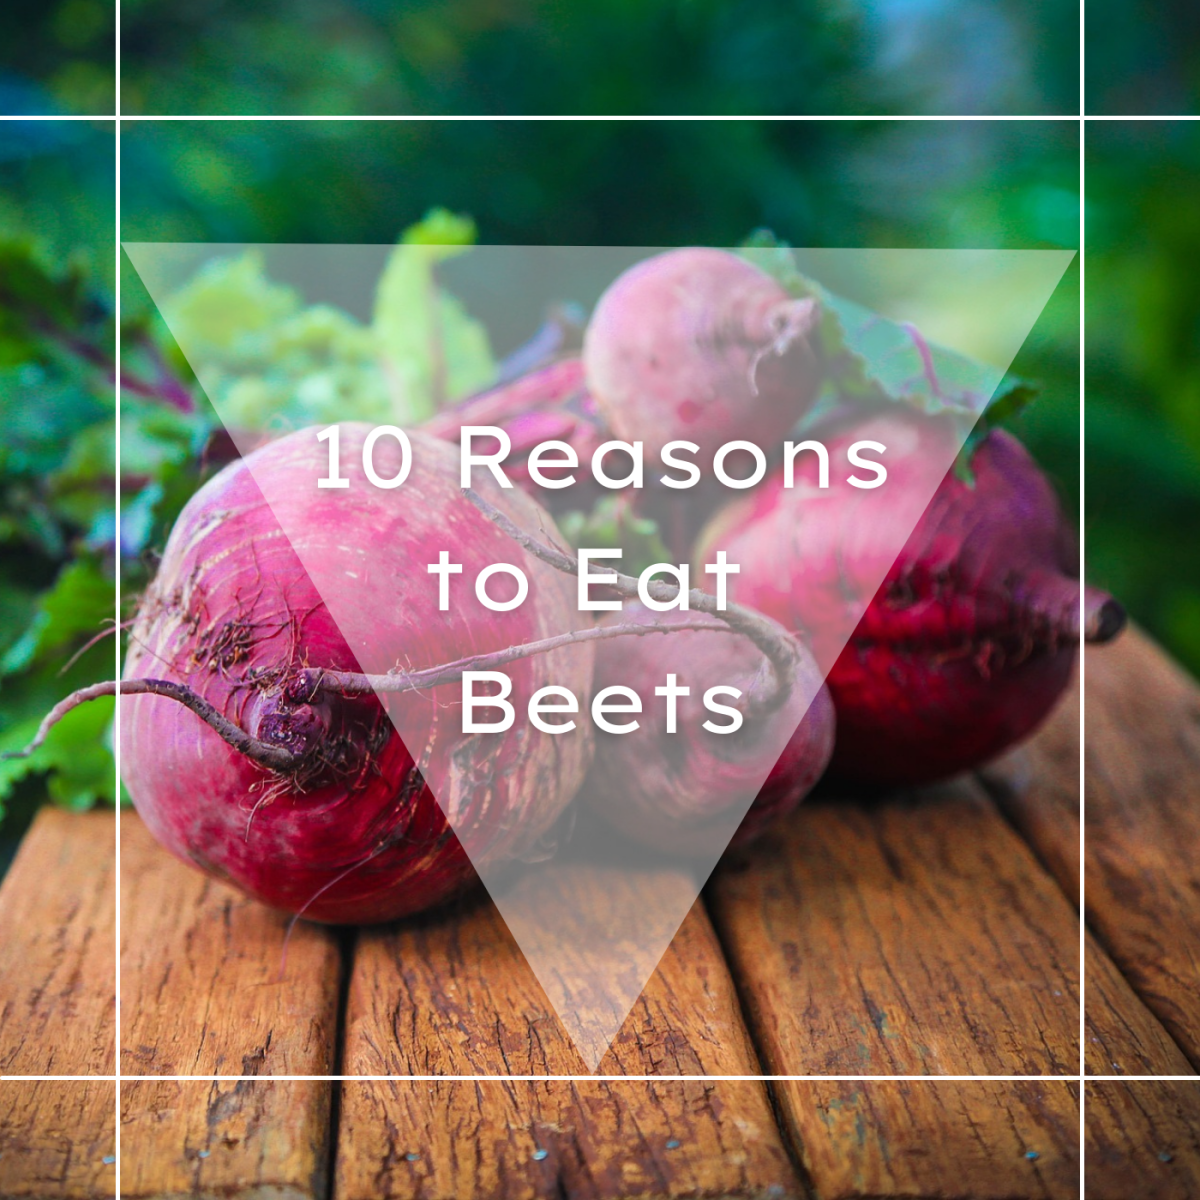 Add beets to your diet for digestive regularity, anti-cancer properties, increased libido, and more!